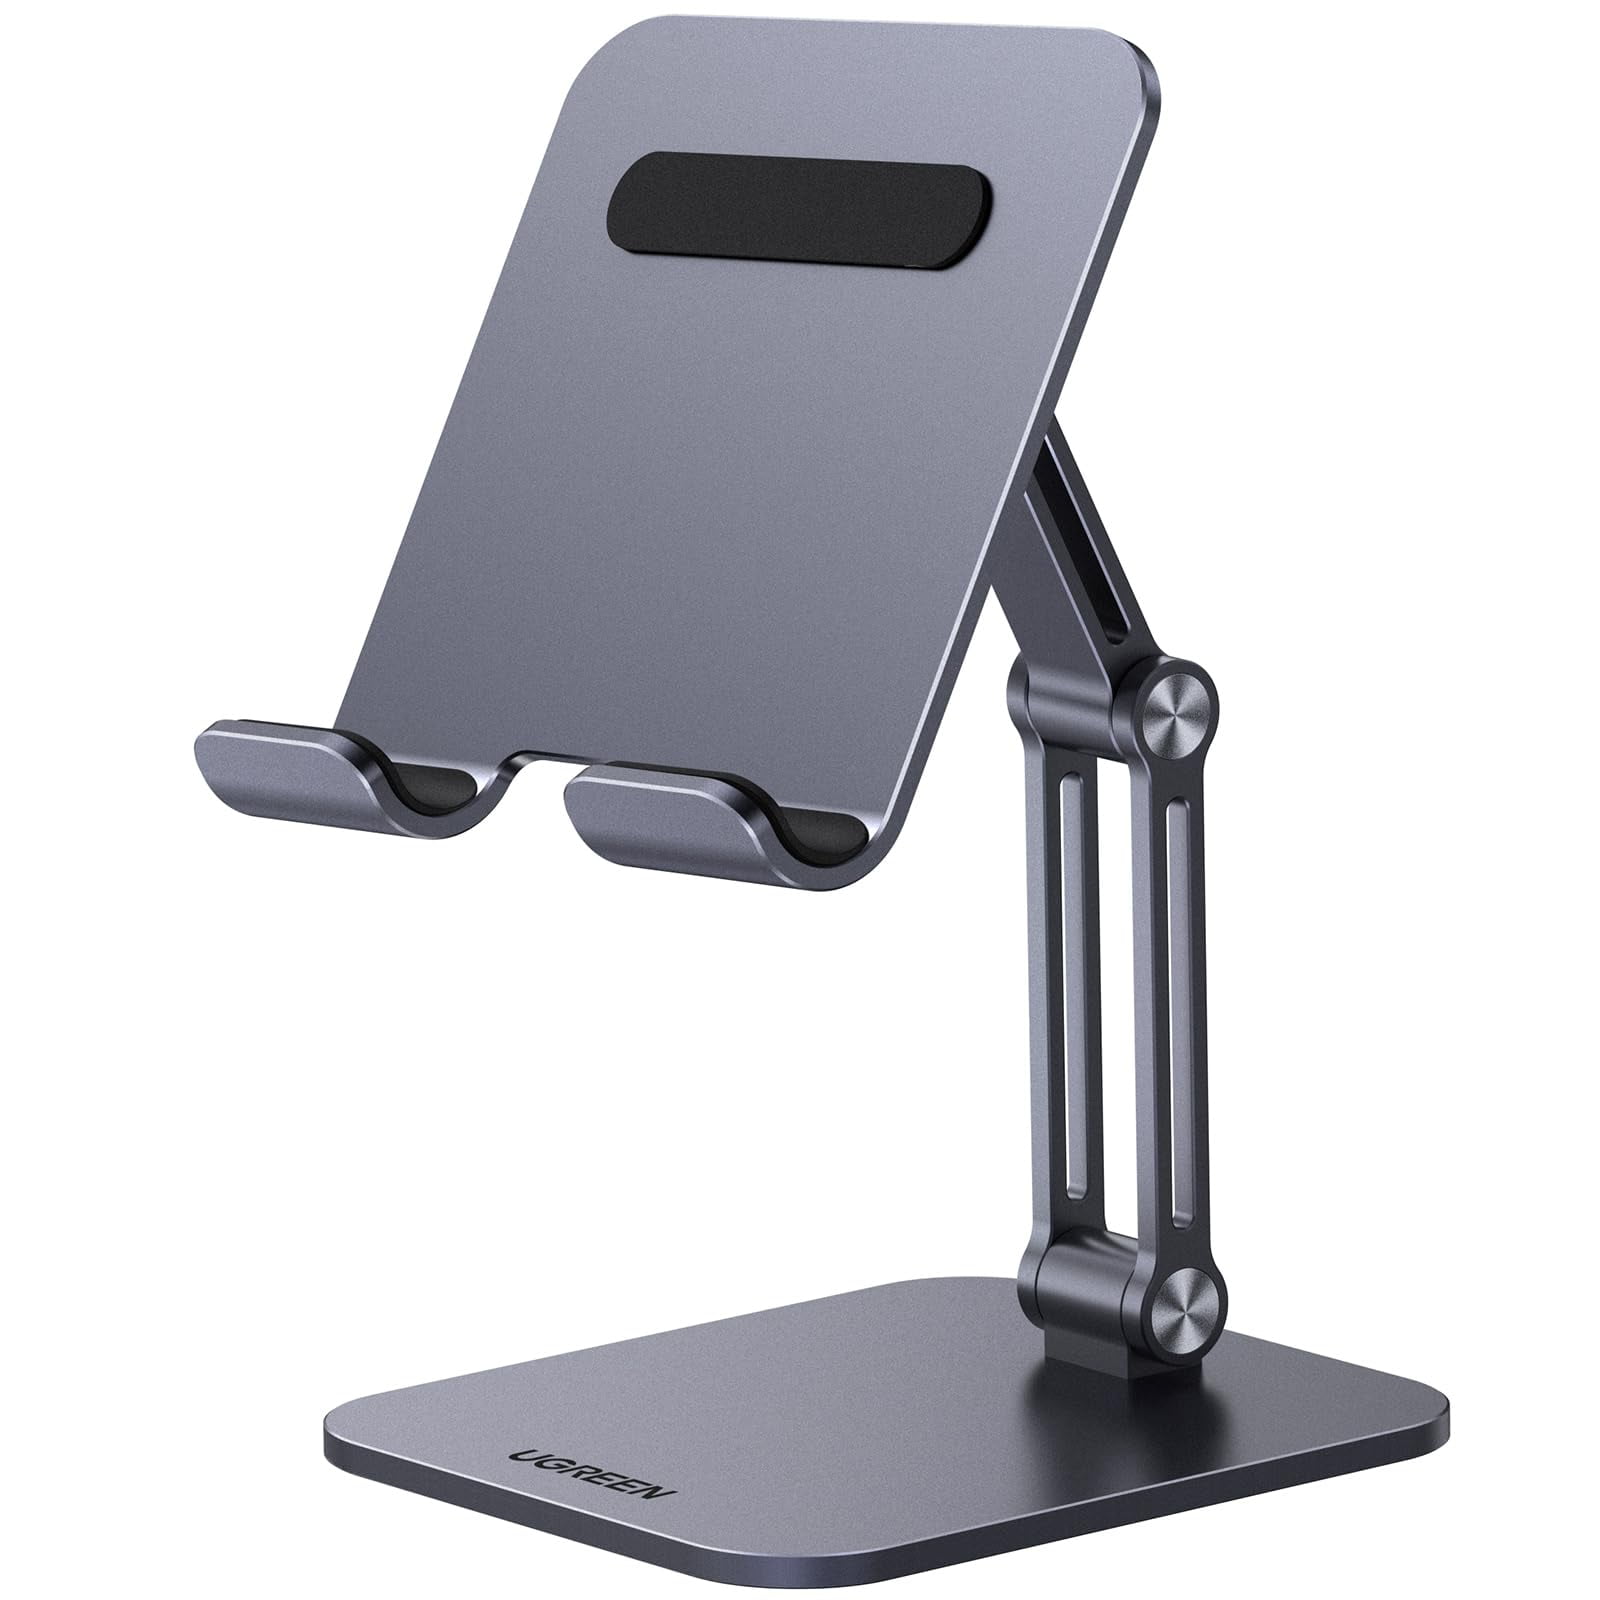 Replacement Accessory Kit for Square Stand (1st generation